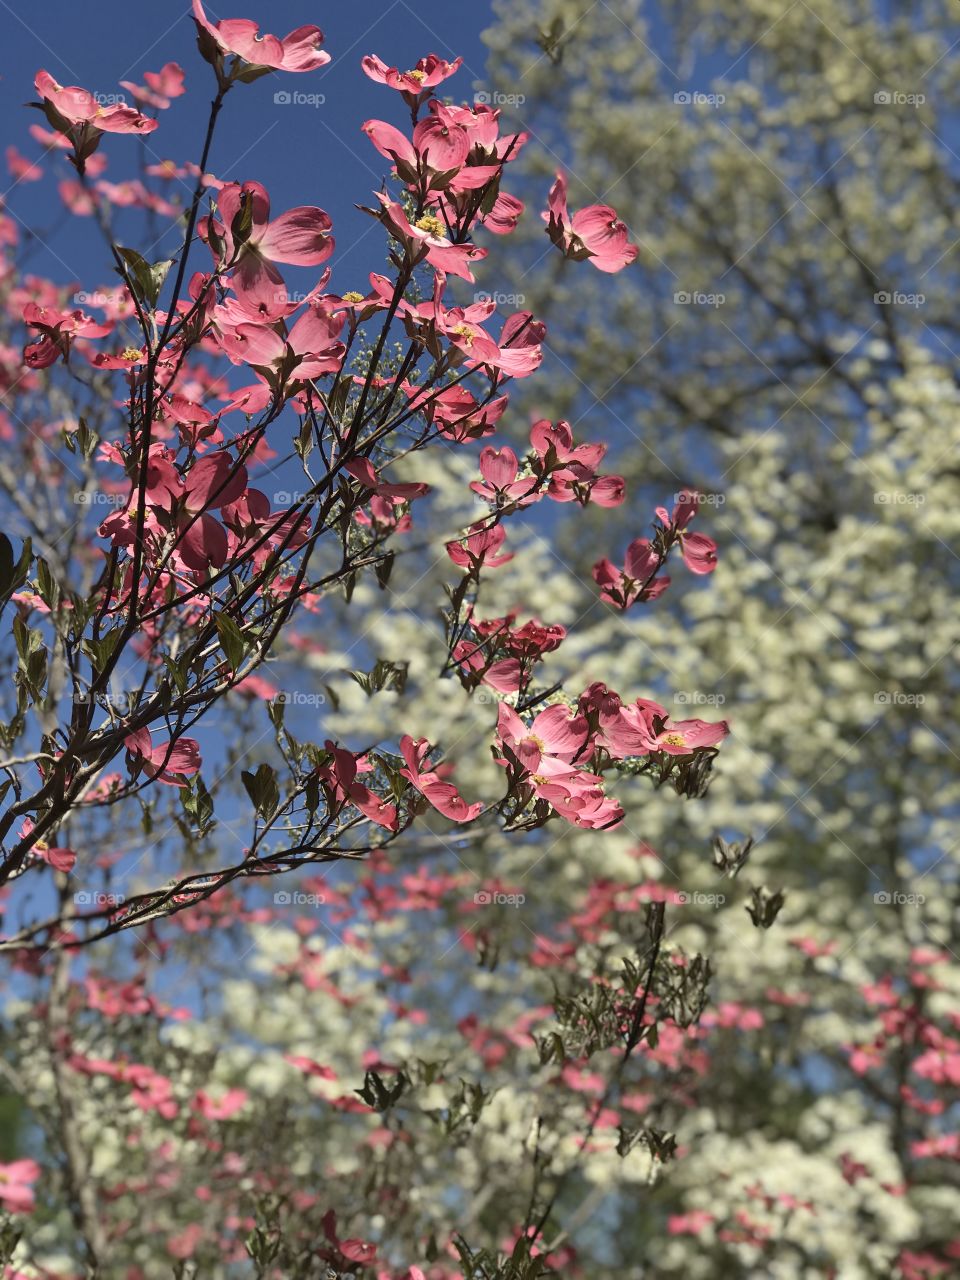 Capturing the DogWood Tree bloom beautifully on this beautiful, warm, Sunny Southern Day. 